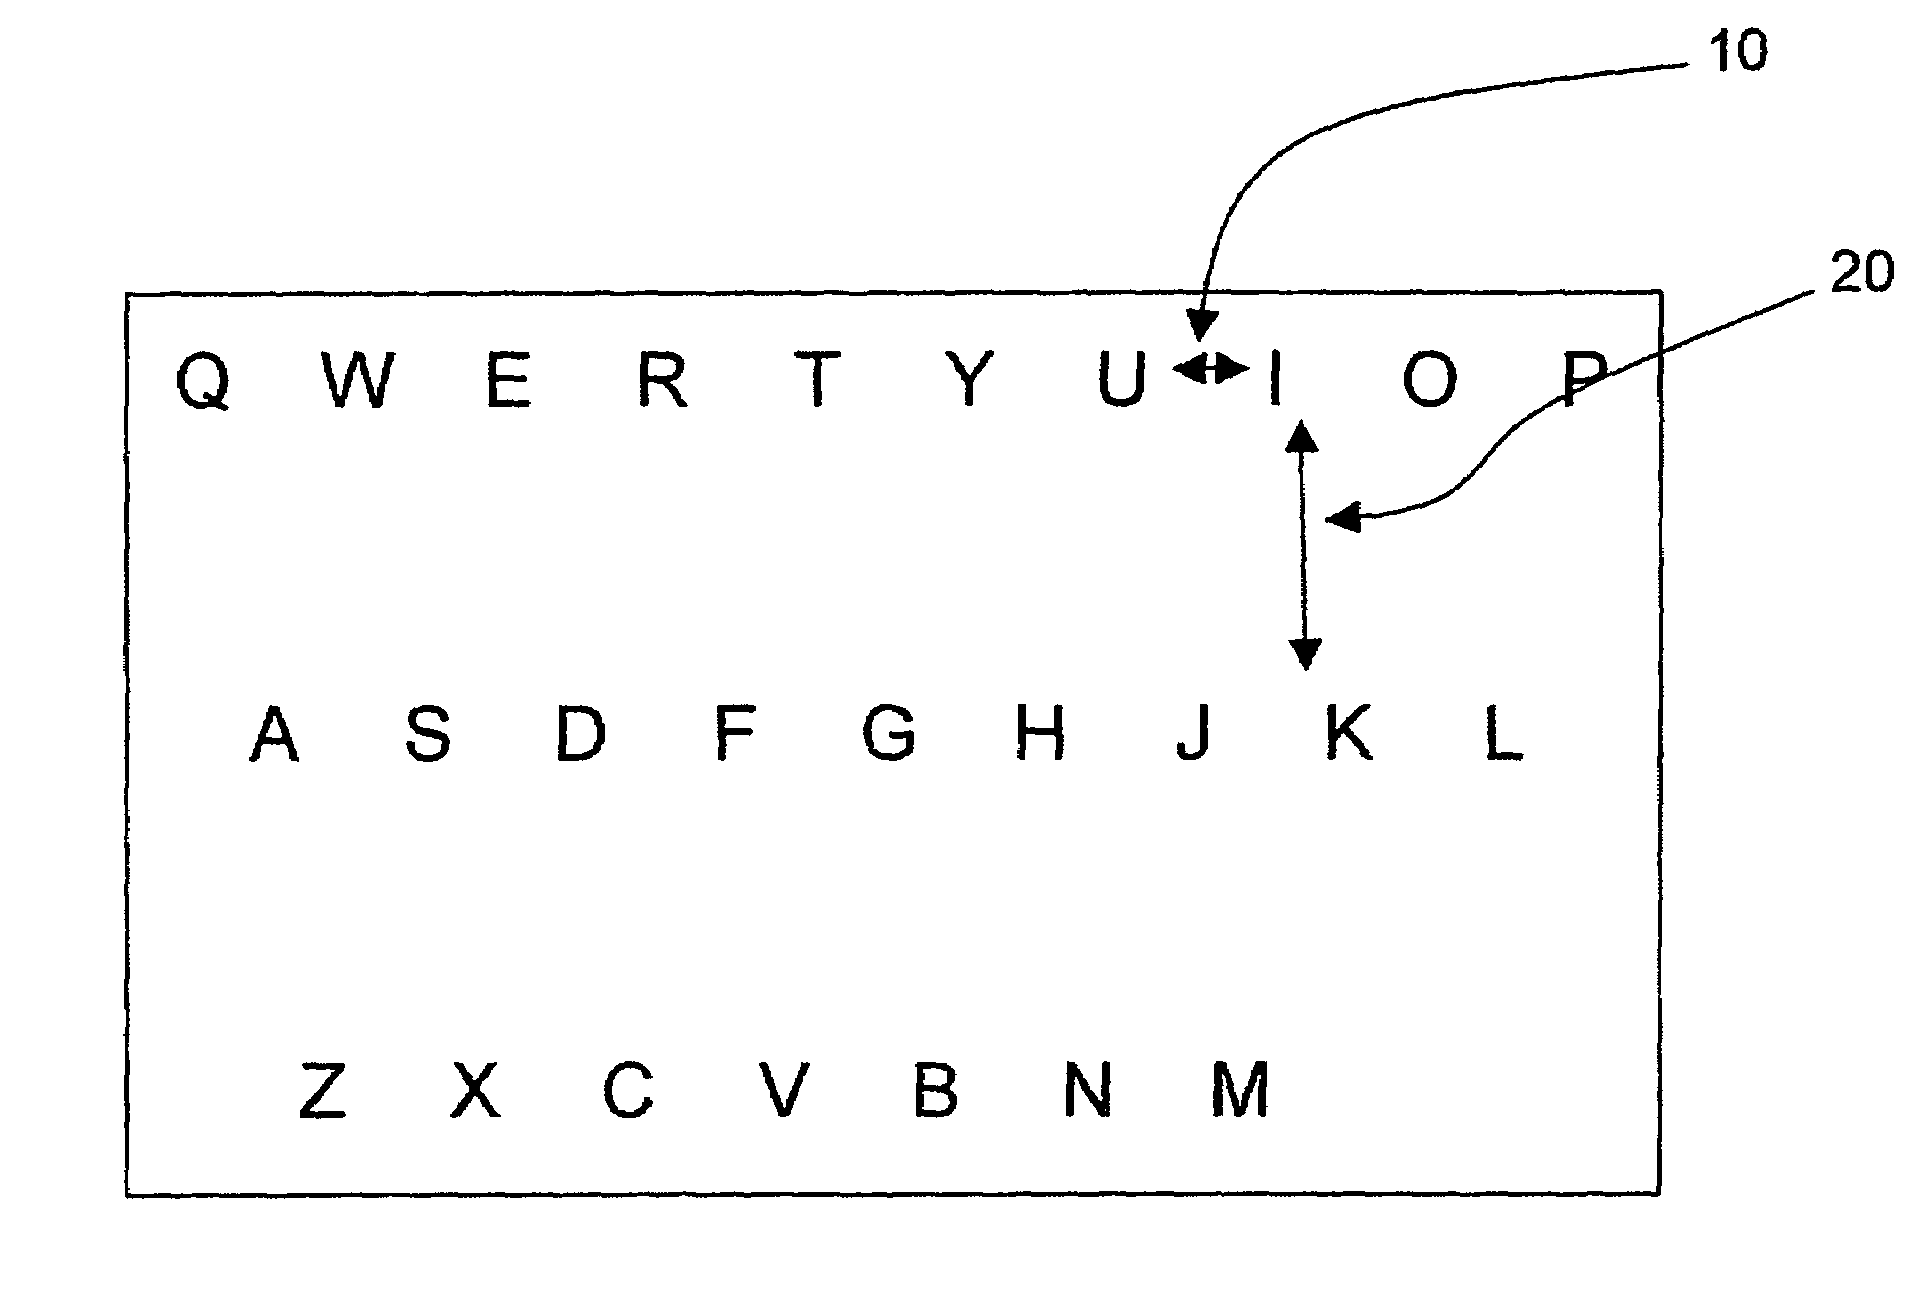 Finger activated reduced keyboard and a method for performing text input